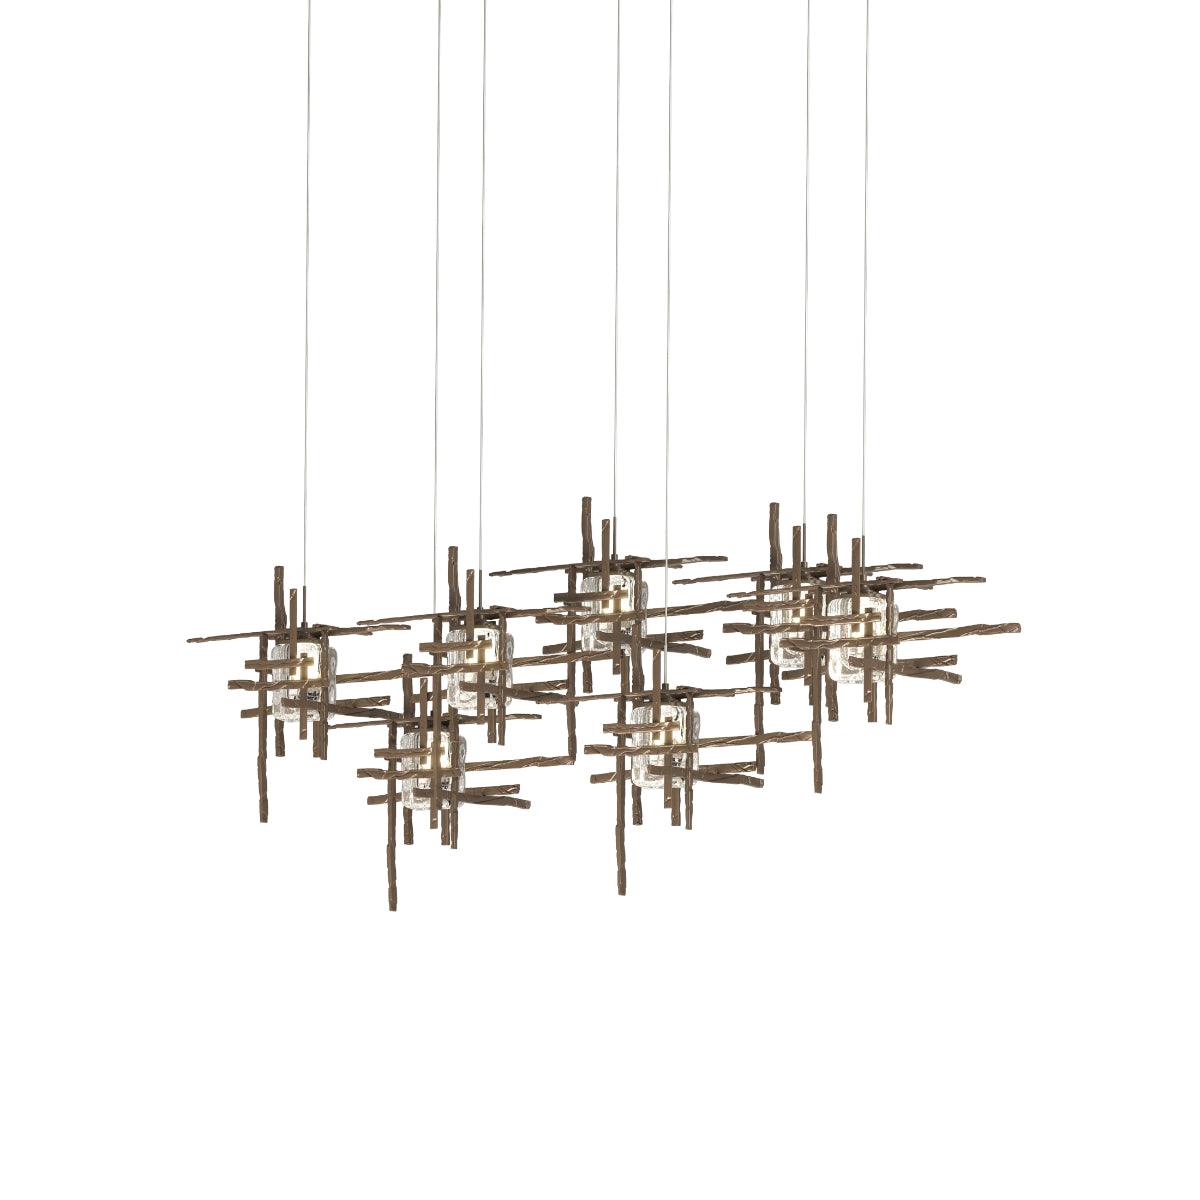 Tura 54 in. 7 Lights Linear Pendant Light with Long Height Seeded Glass